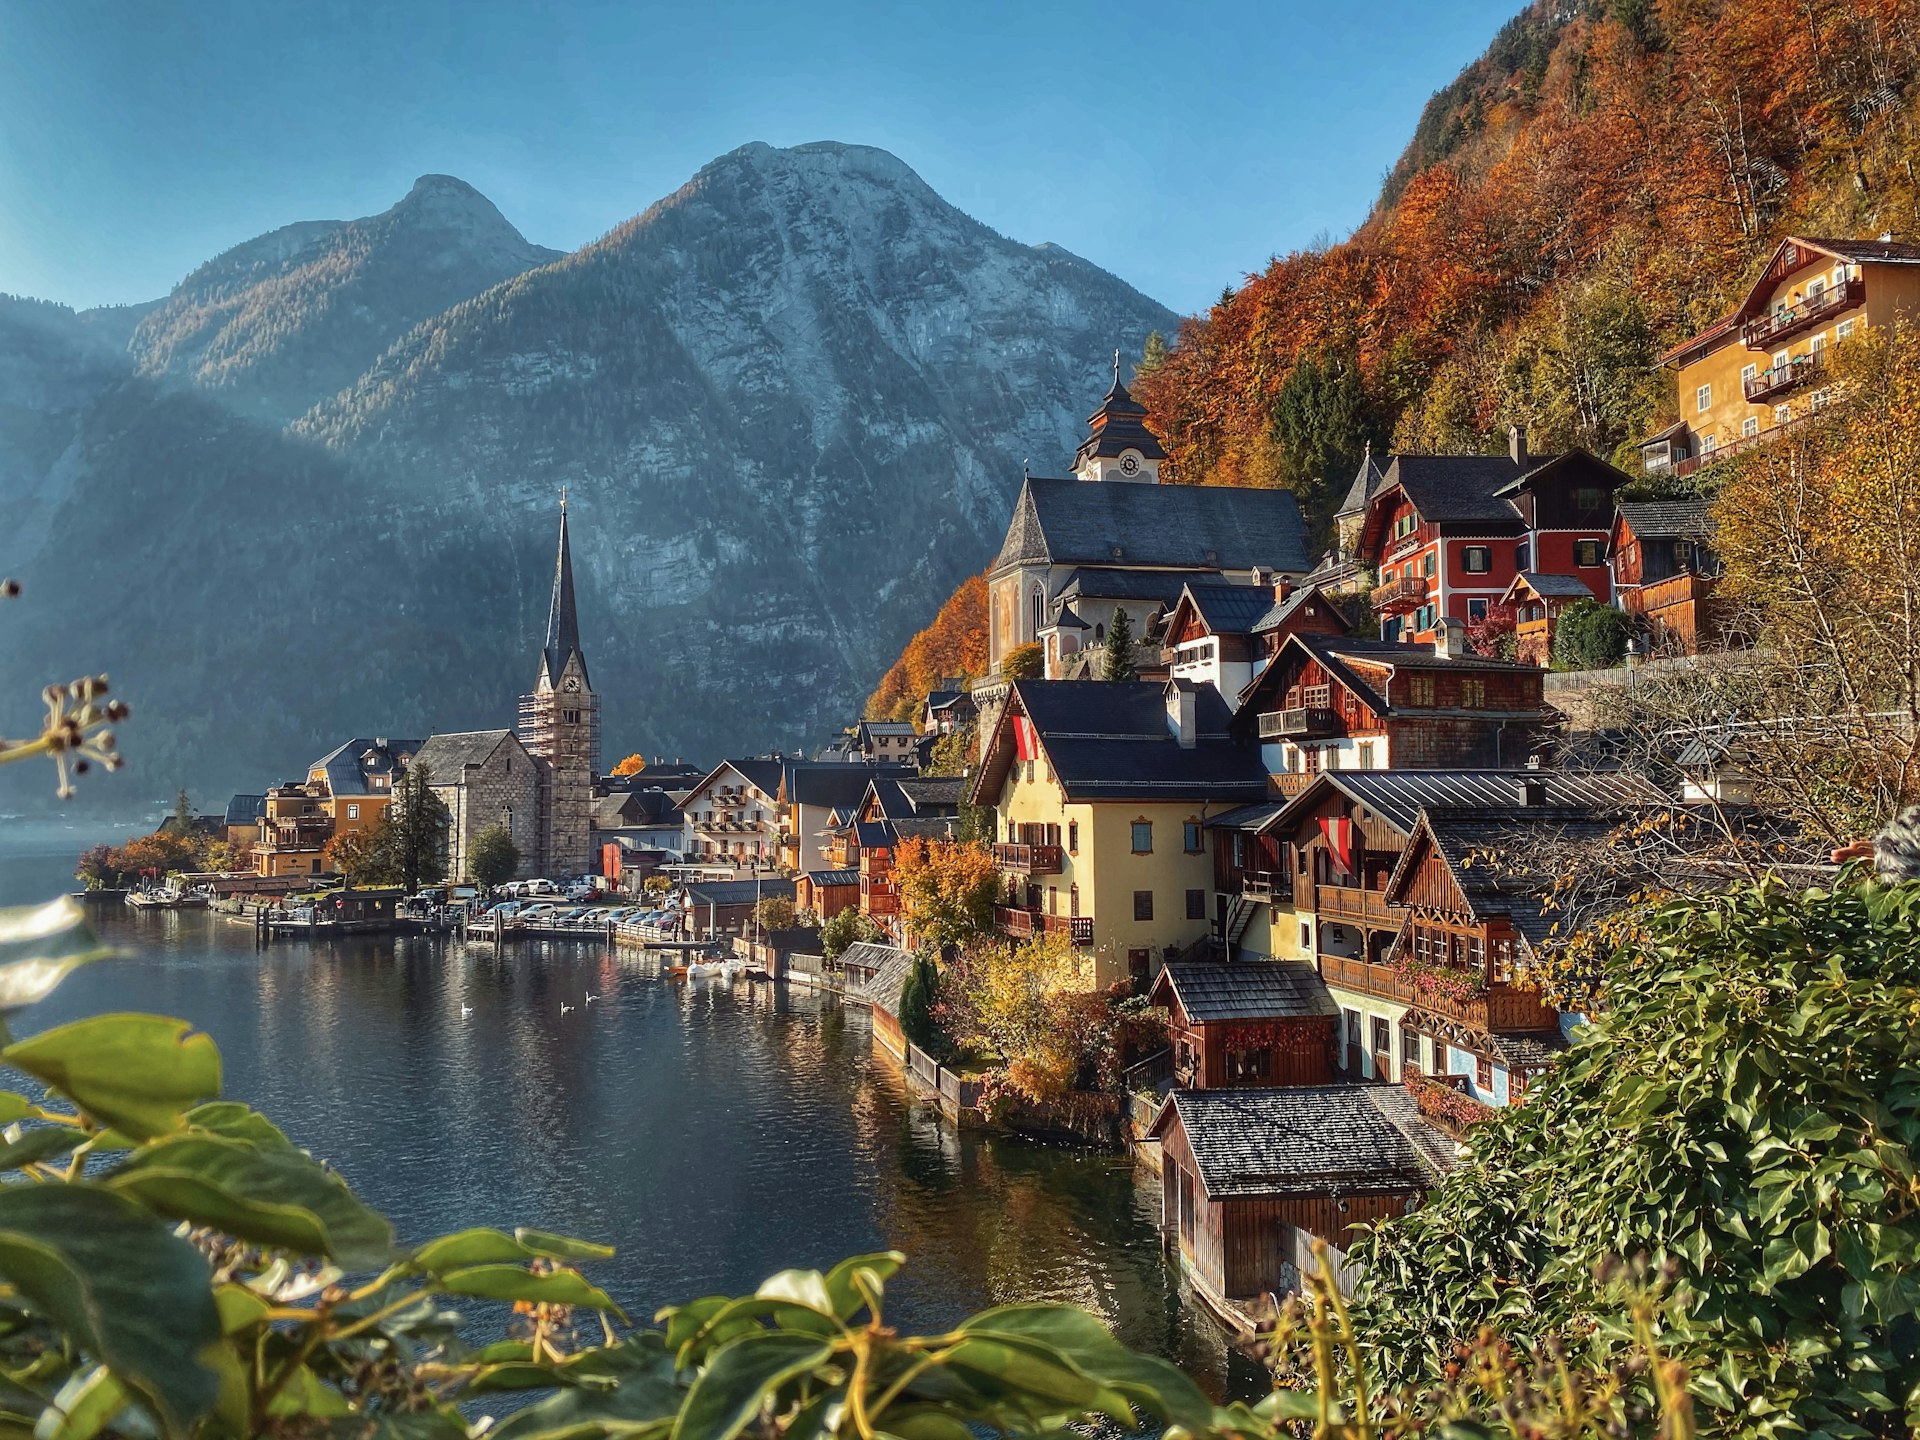 Historic Hallstat sits on the edge of a flat, reflective lake, with mountains in the background. The leaves are bright orange and red.